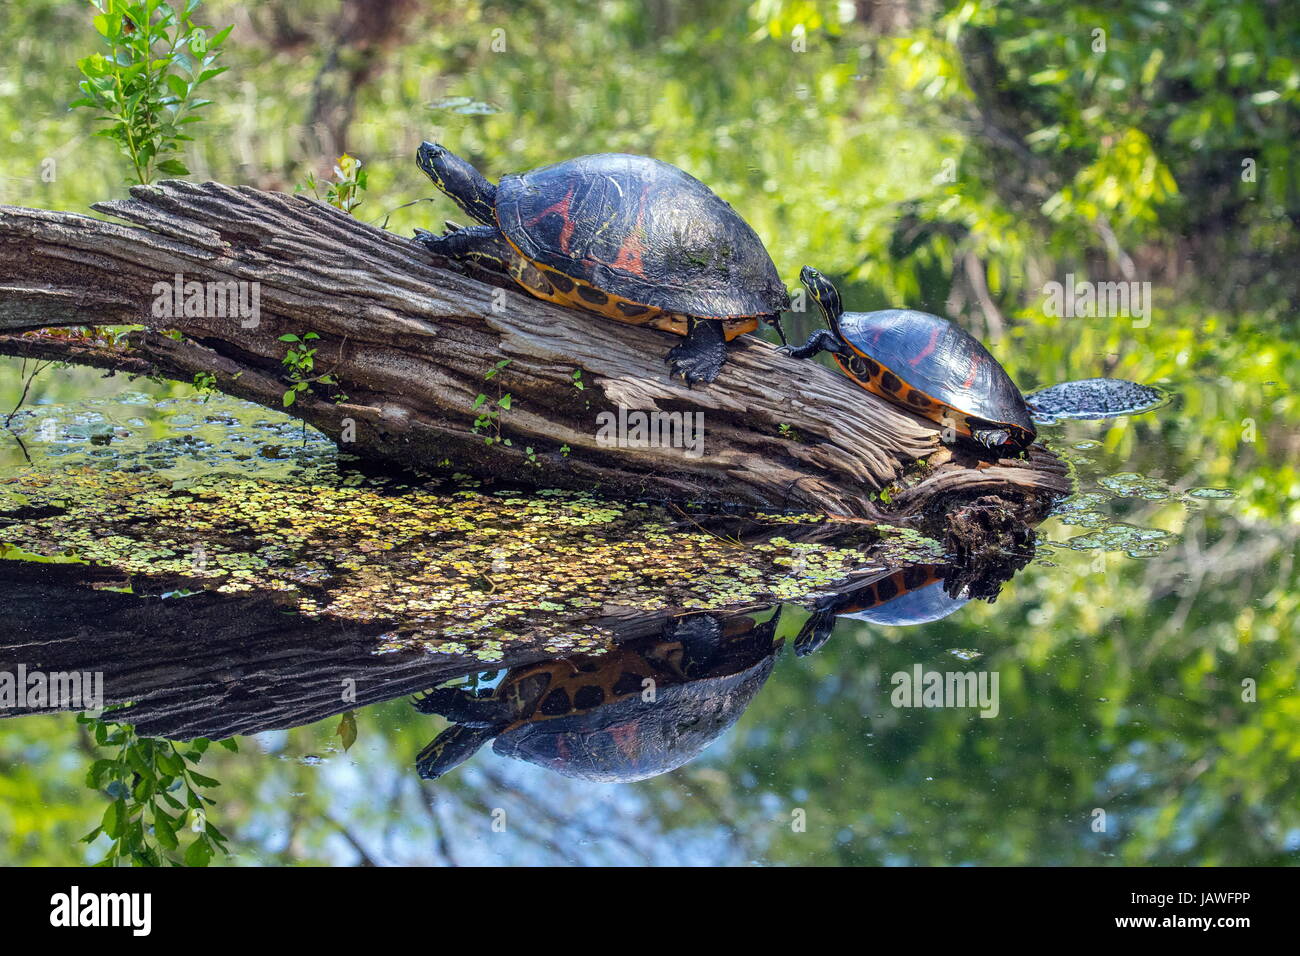 Florida red bellied cooters, Pseudemys nelsoni, on a log. Stock Photo